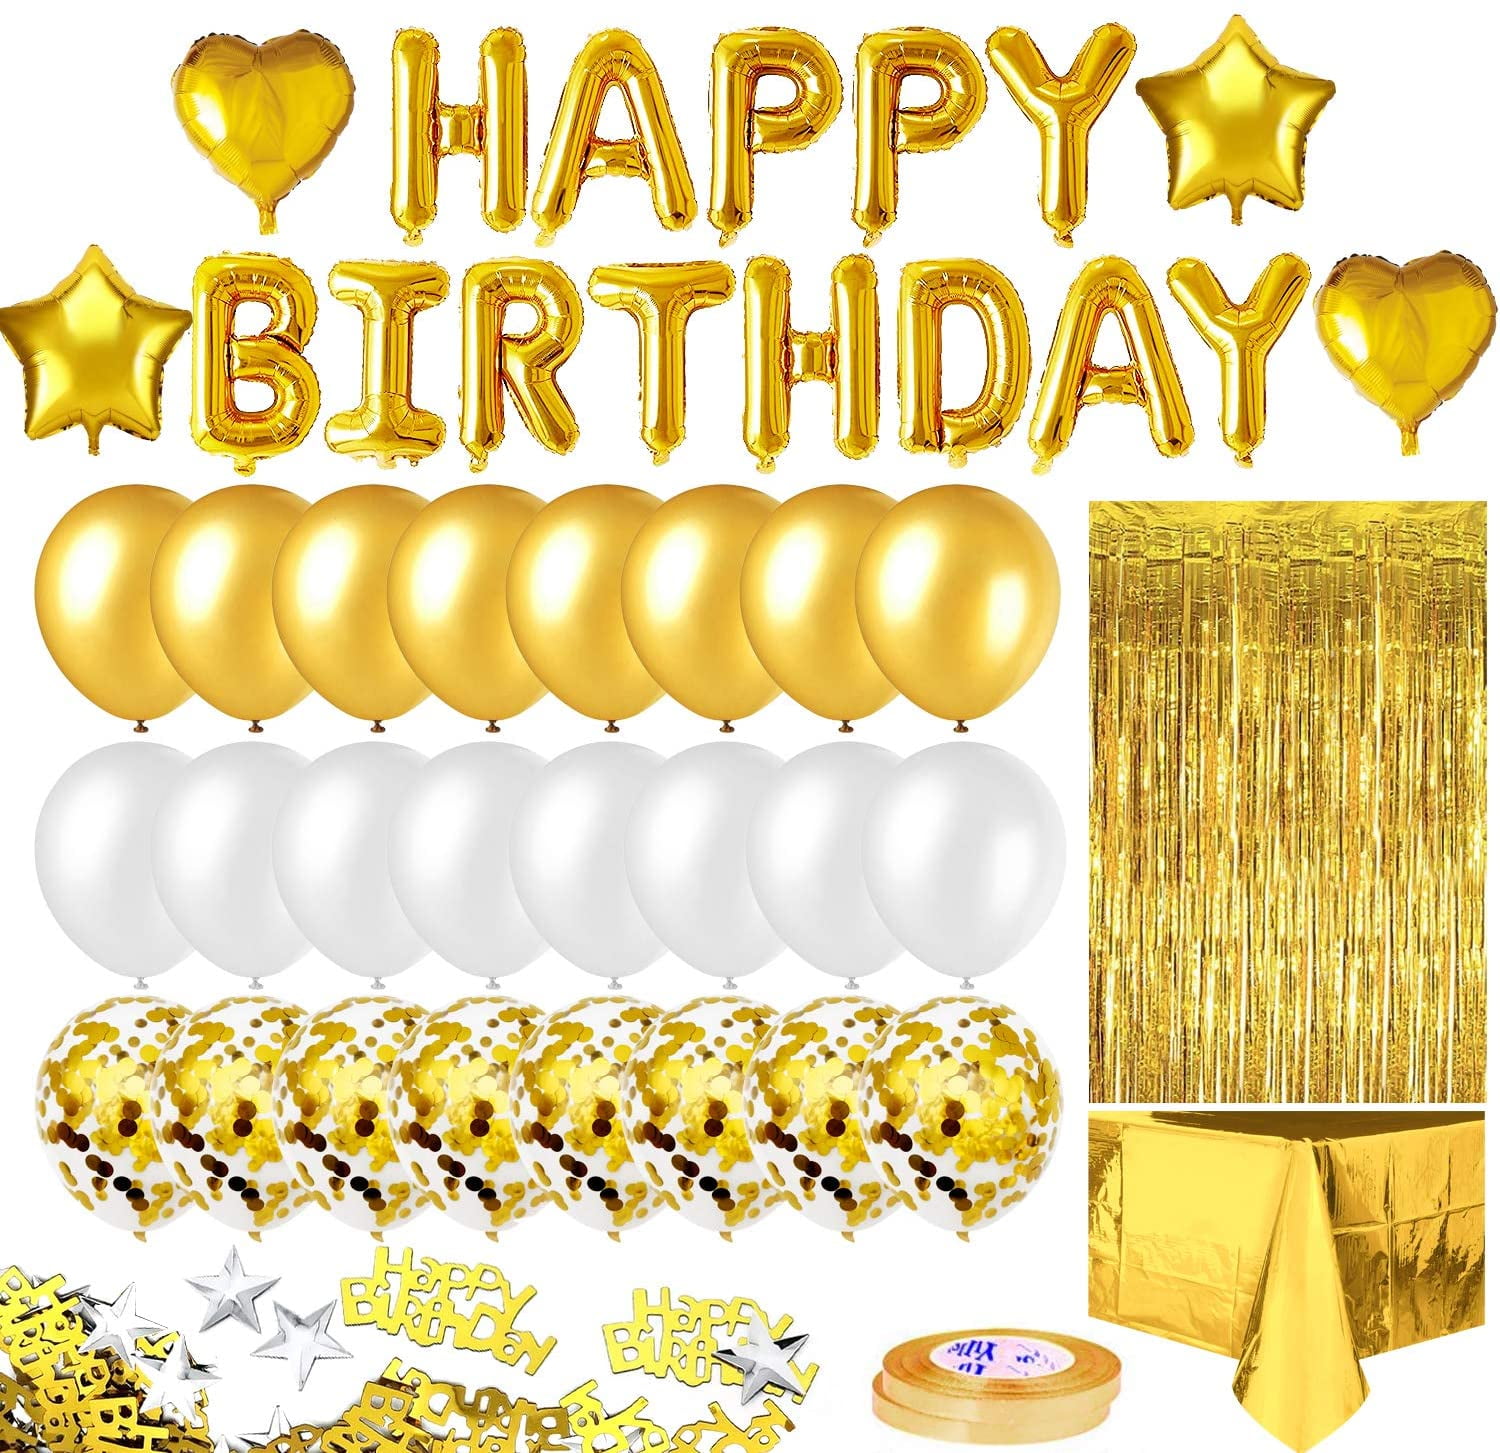 des nappes/Plates/Balloons 1 C Golden Birthday Party Tableware & DECORATIONS